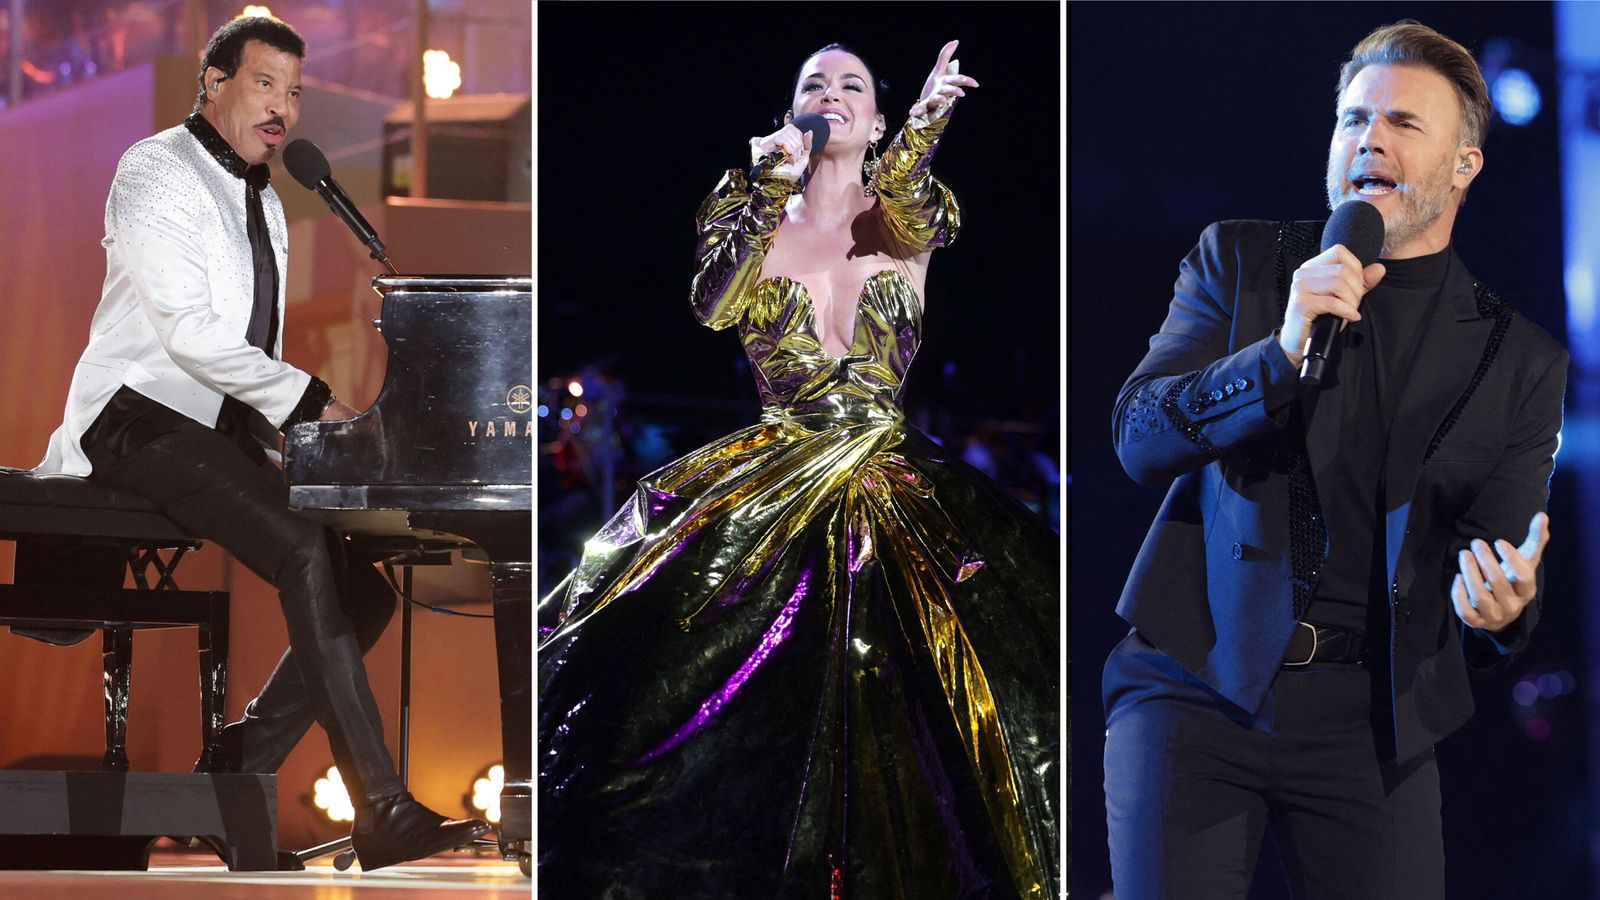 Lionel Richie, Take That and Katy Perry star at King's coronation concert